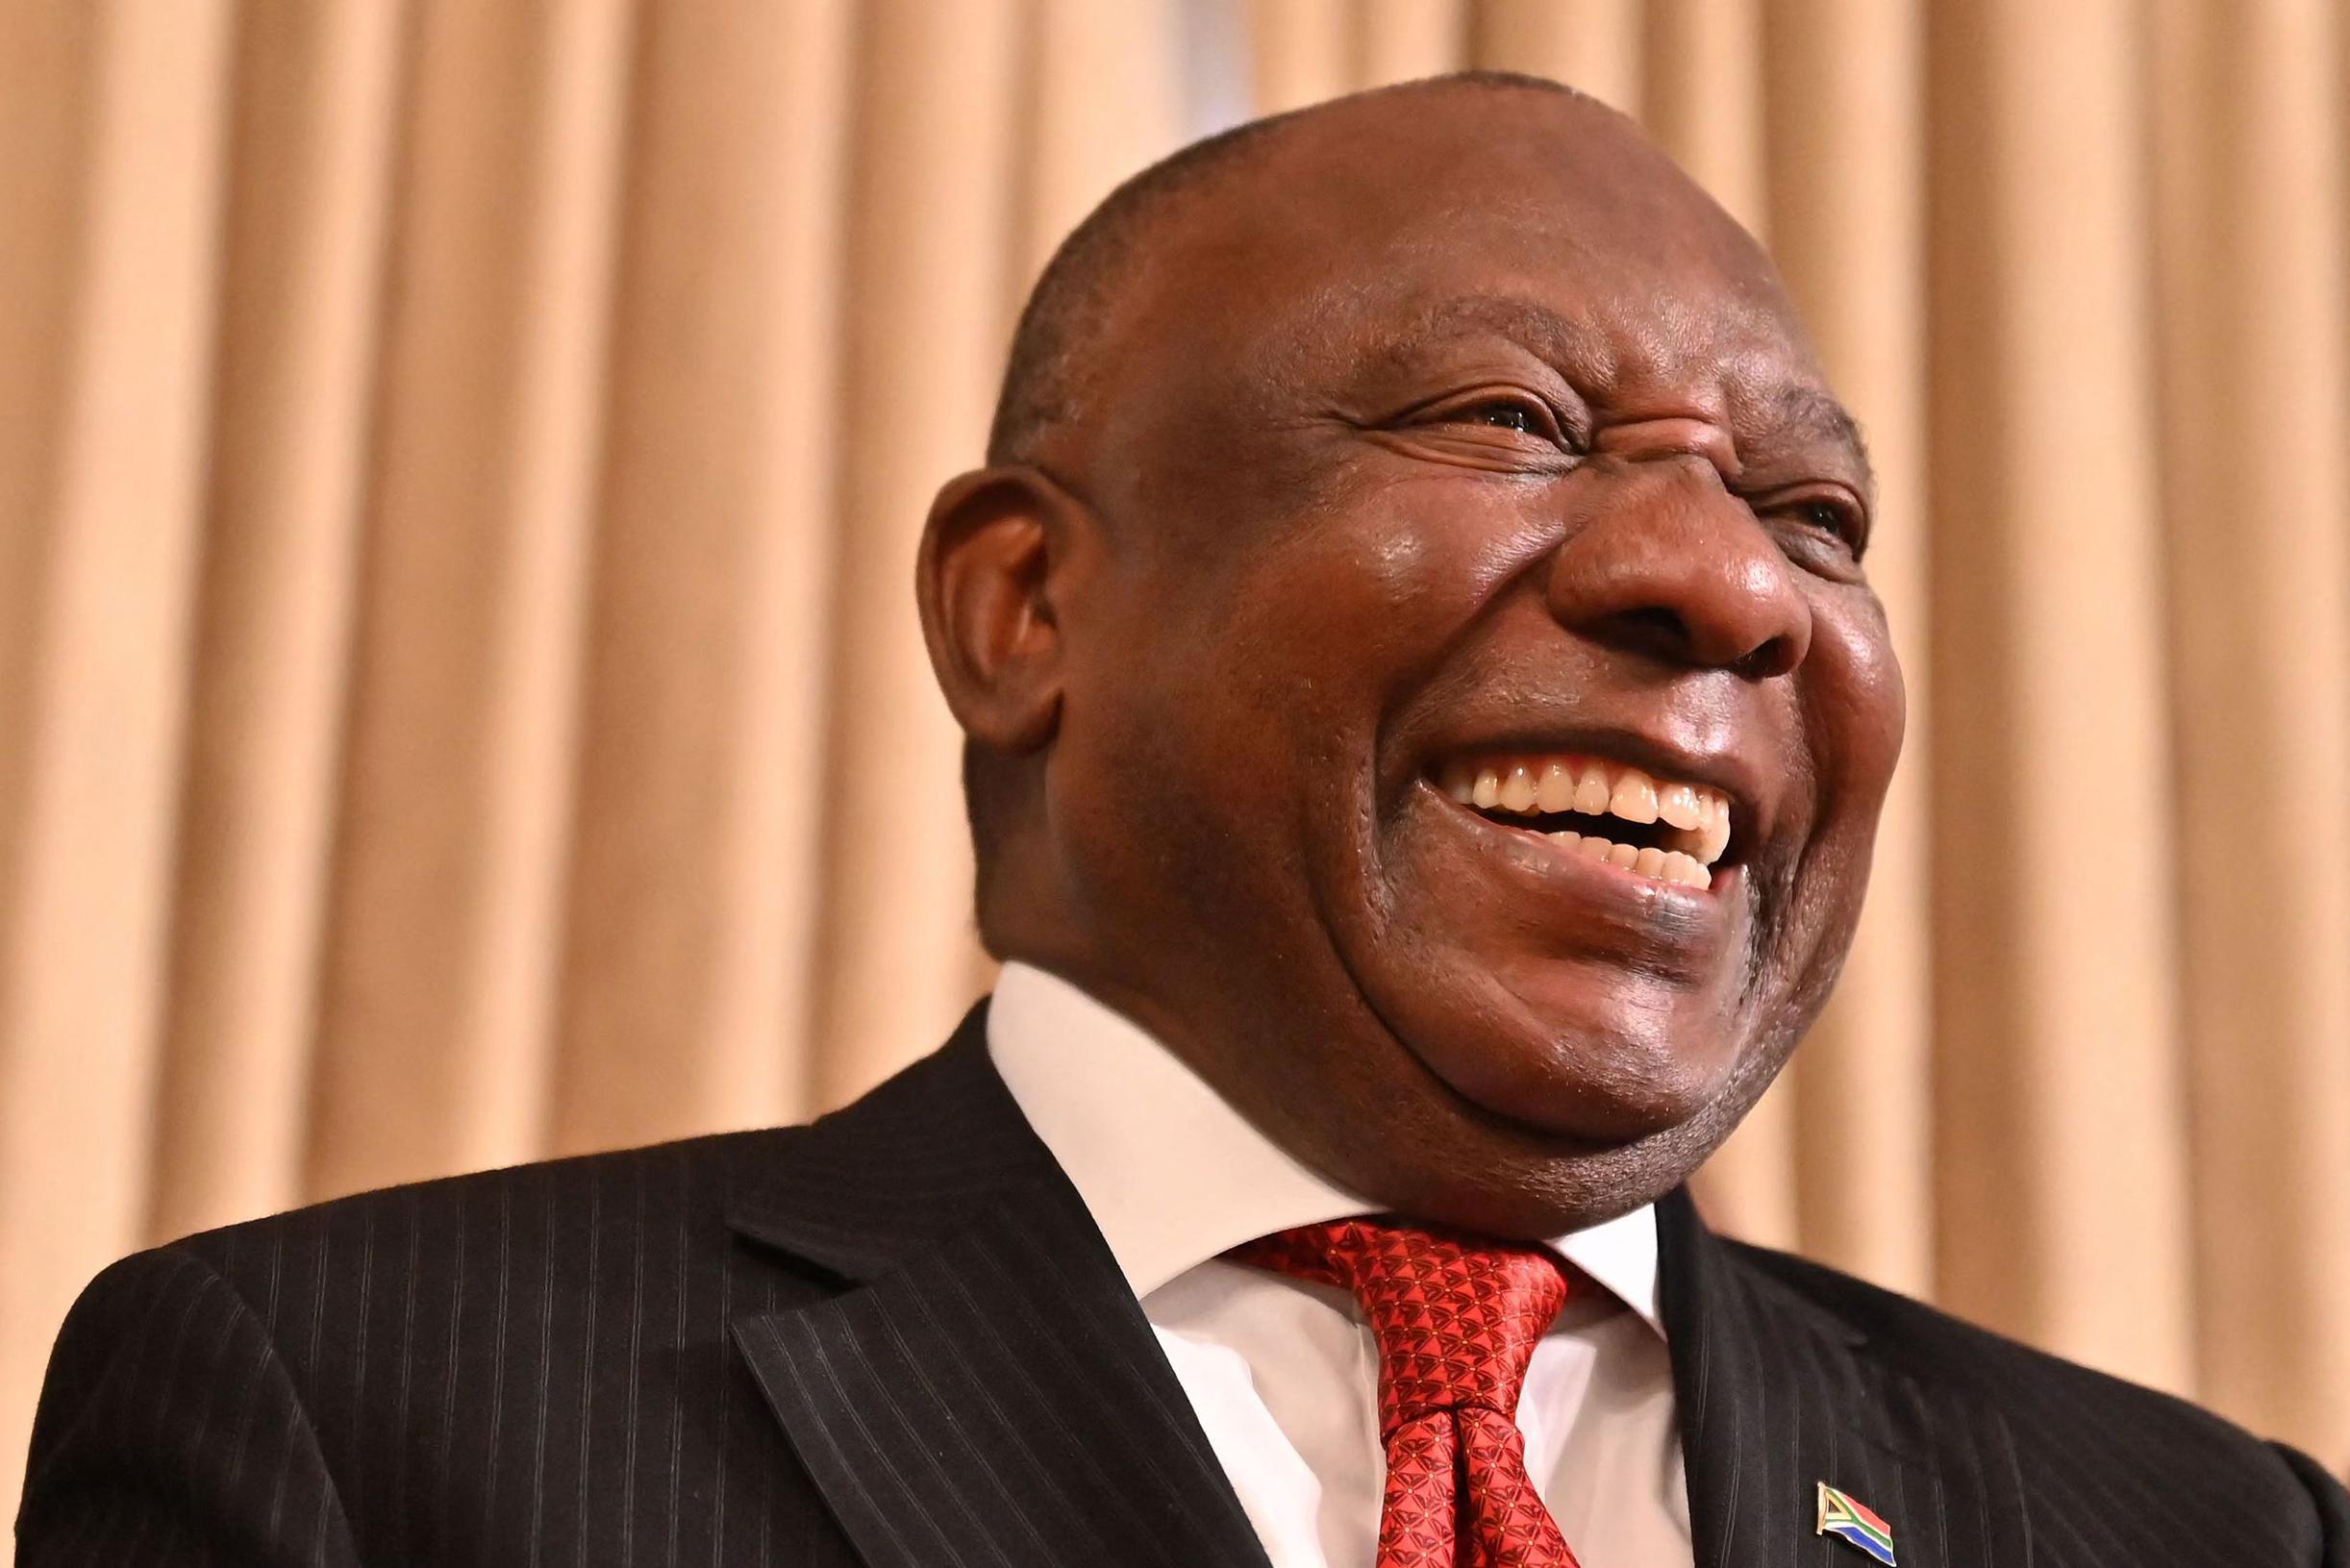 Commission of Inquiry paves way for impeachment proceedings against South African President Cyril Ramaphosa